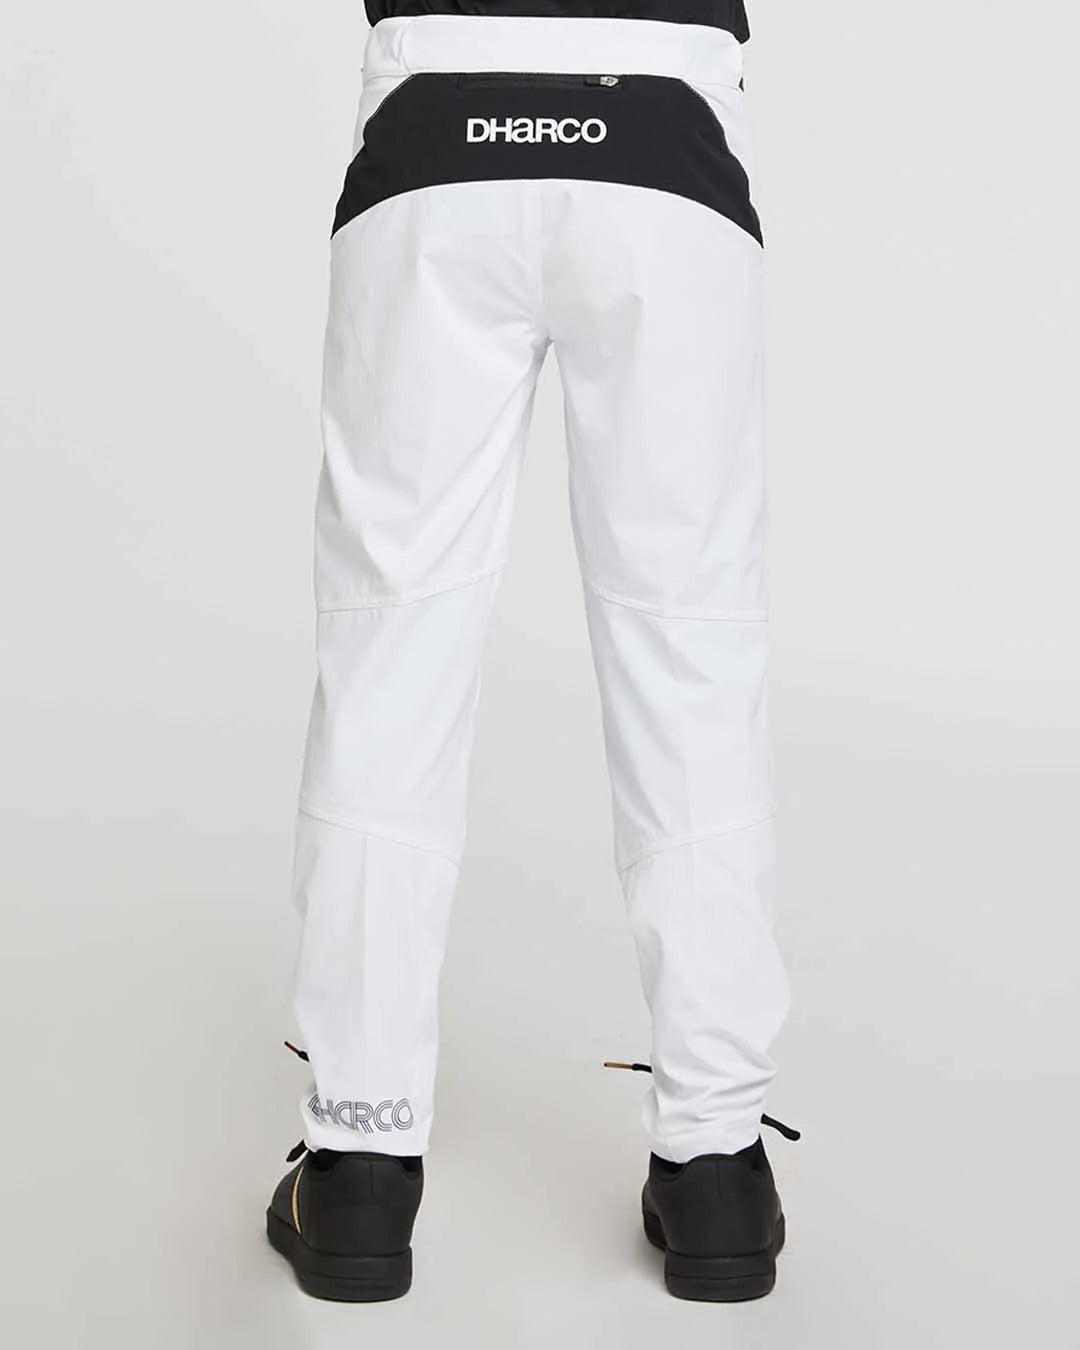 DHaRCO   YOUTH GRAVITY PANTS white